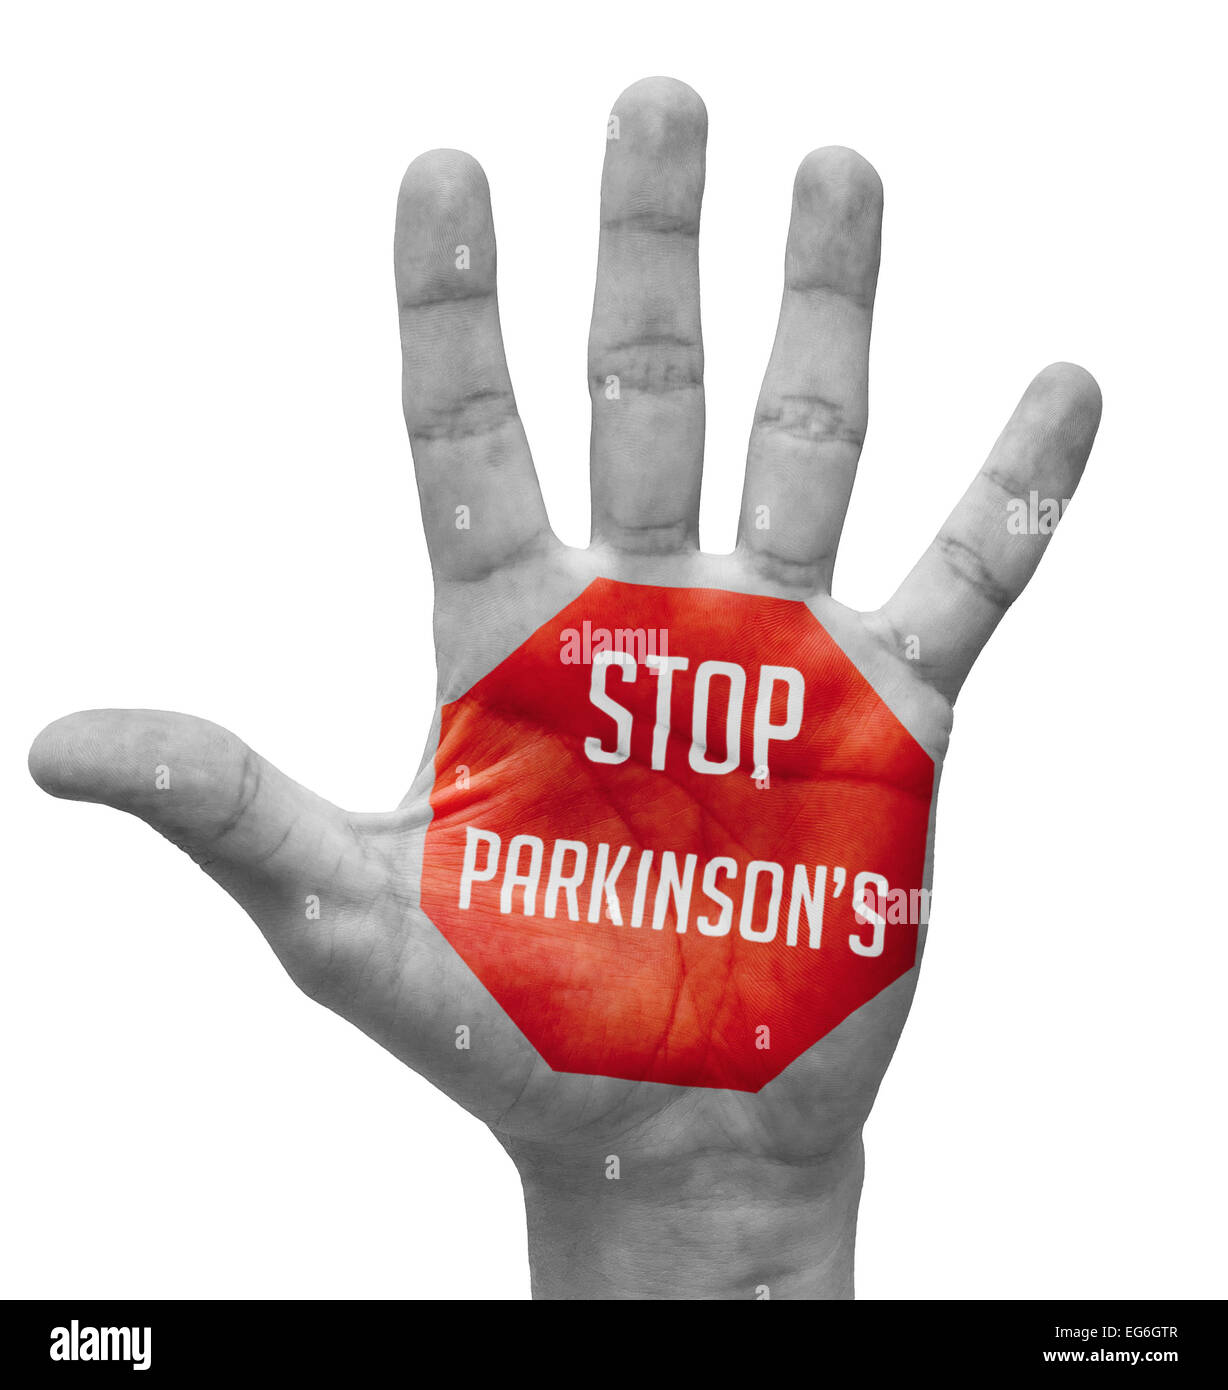 Stop Parkinson's - Red Sign Painted on Open Hand Raised, Isolated on White Background. Stock Photo